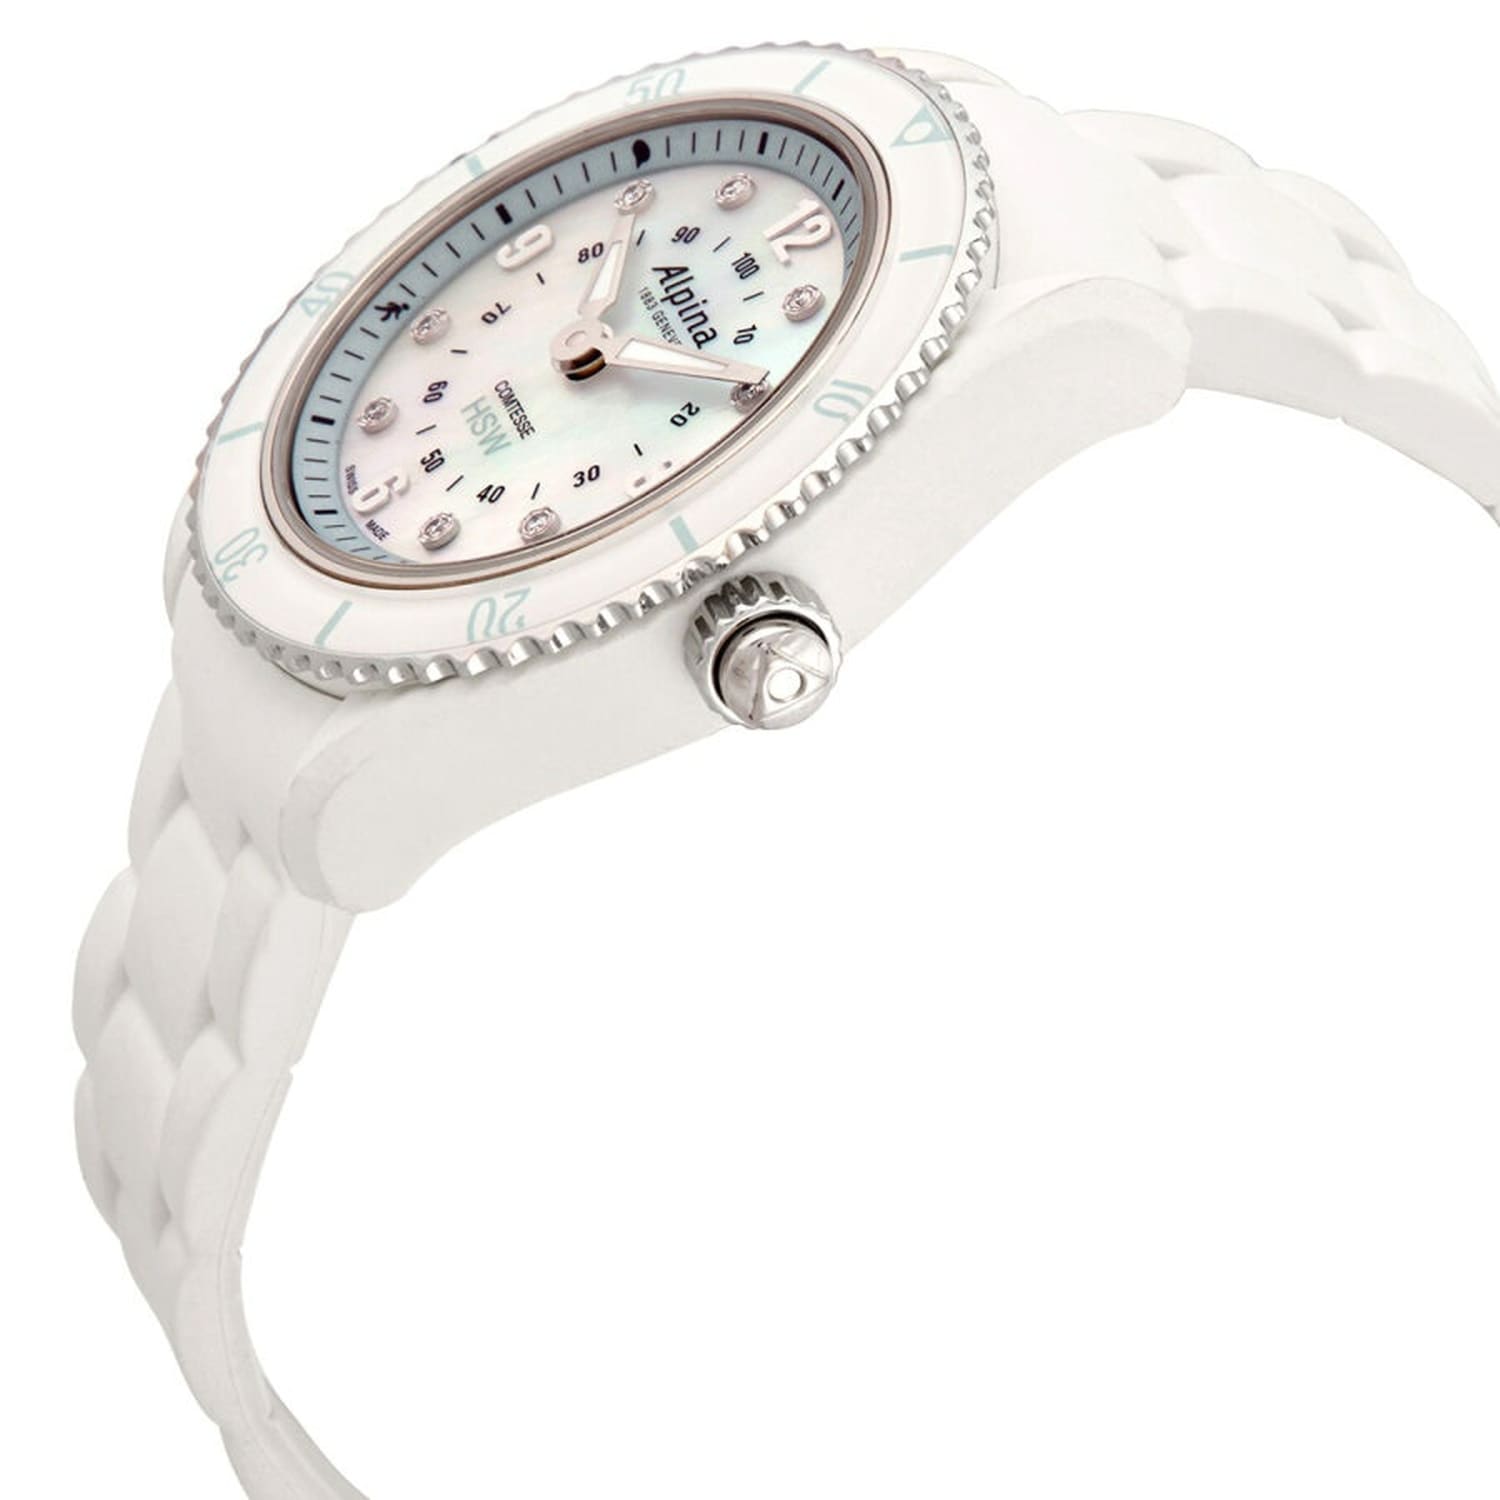 Alpina Women’s ’Horological’ Smart Watch Mother of Pearl 